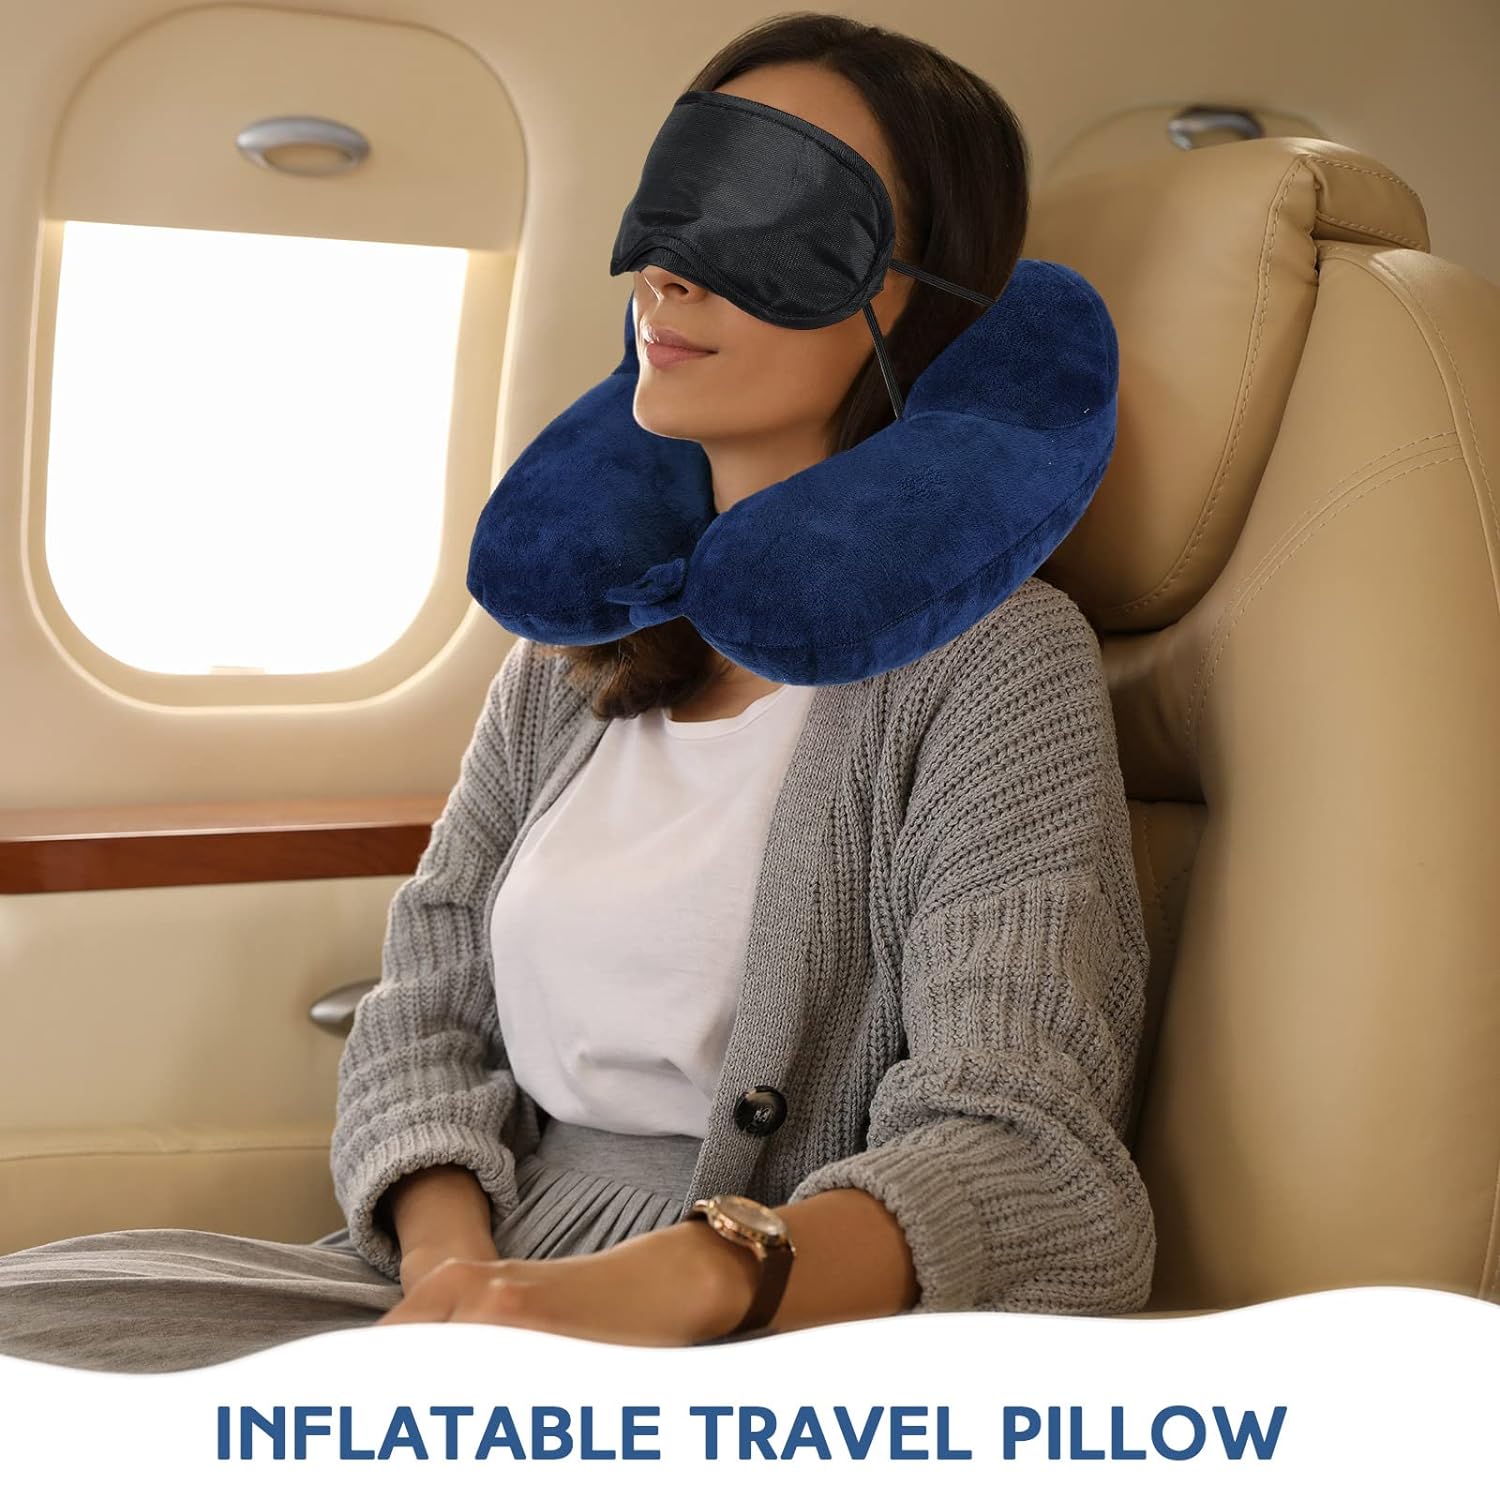 Sintuff 2 Pcs Inflatable Travel Pillow Self Inflatable Pillow with Compact Bag and Blindfold Soft Velvet Inflatable Neck Pillow for Traveling, Airplanes, Train, Car, Office, Gray and Blue